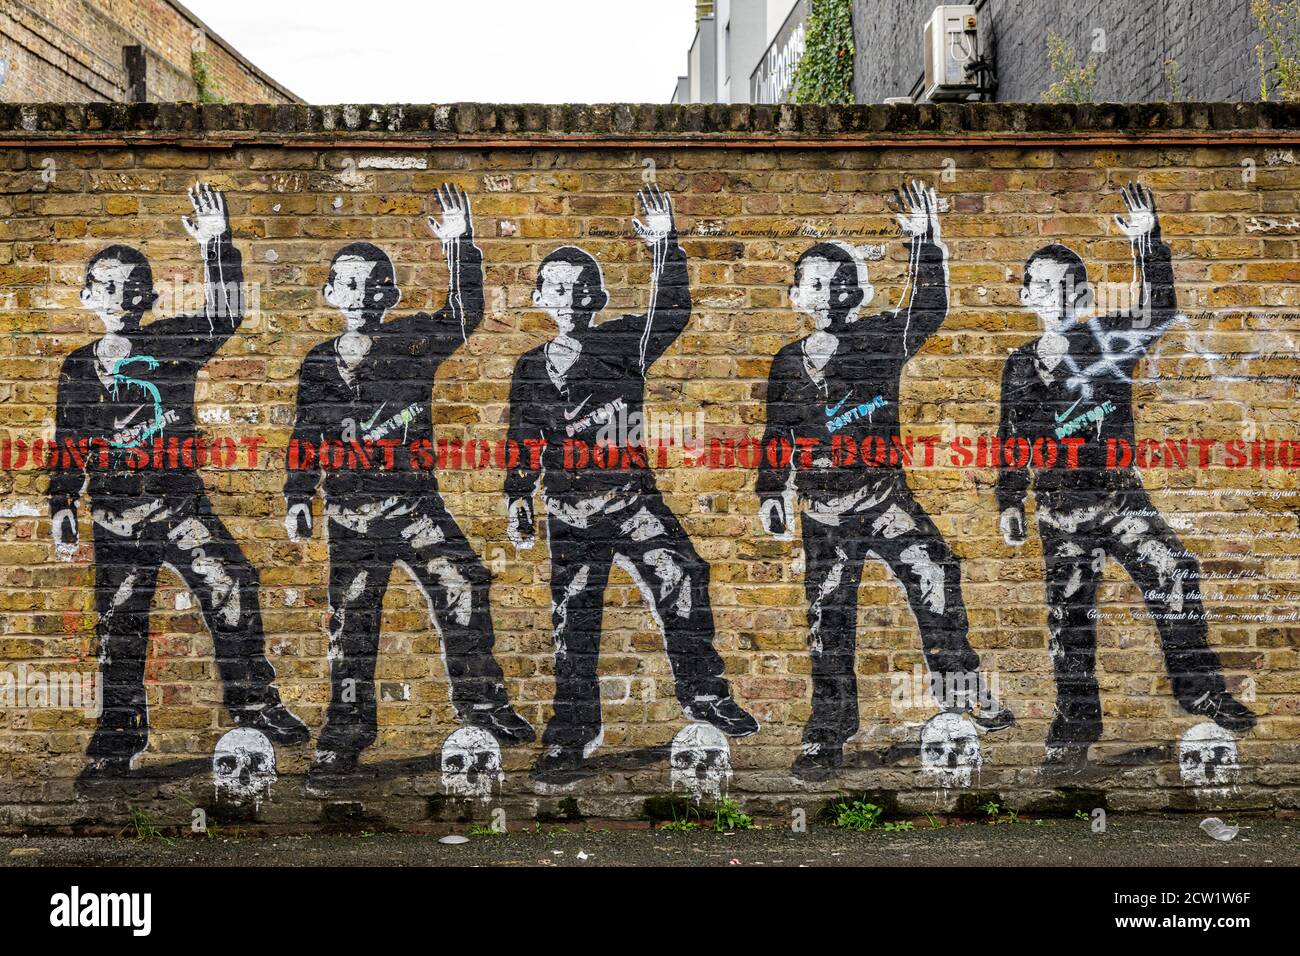 Graffiti art on a wall depicts images opposing police violence and corporate power in London, United Kingdom. Stock Photo